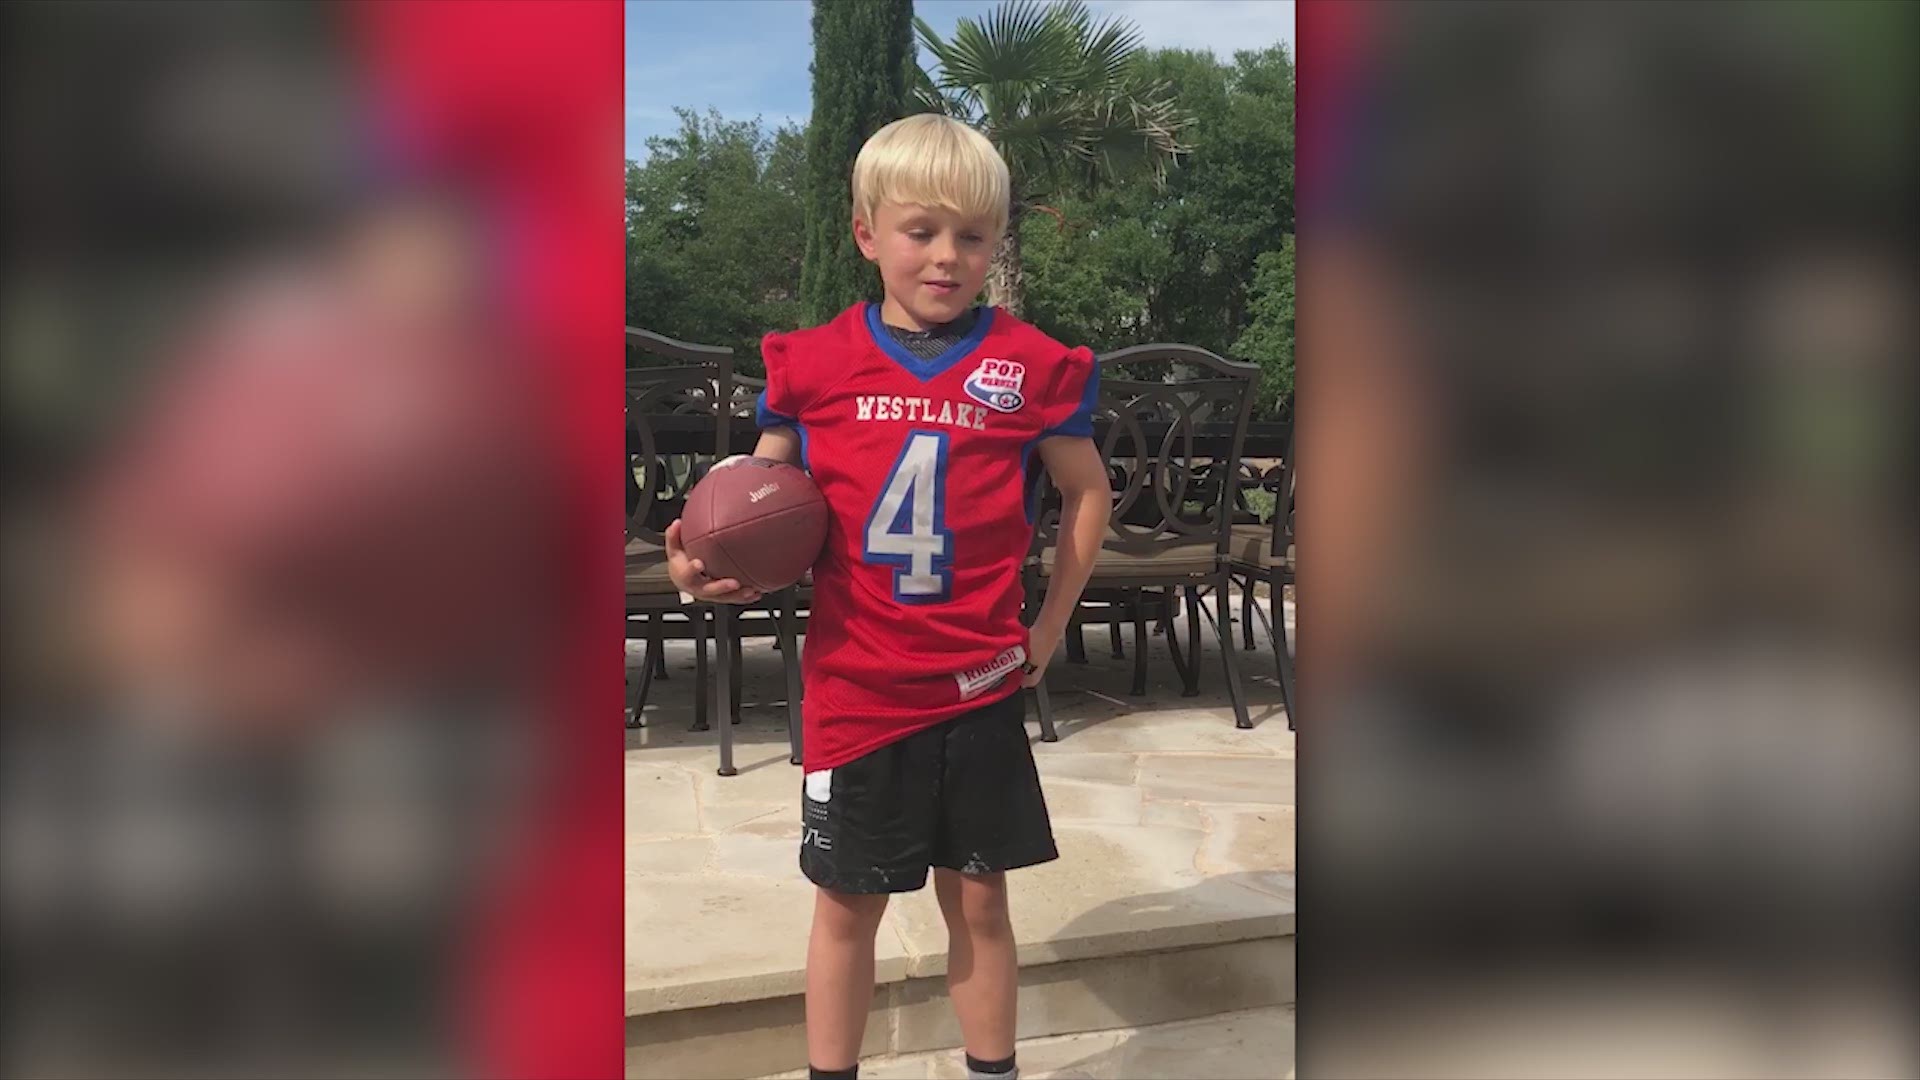 Inside Pop Warner Magazine cover athlete Tripp Munford from Westlake Pop Warner tells KVUE why he loves football and who his favorite player is.